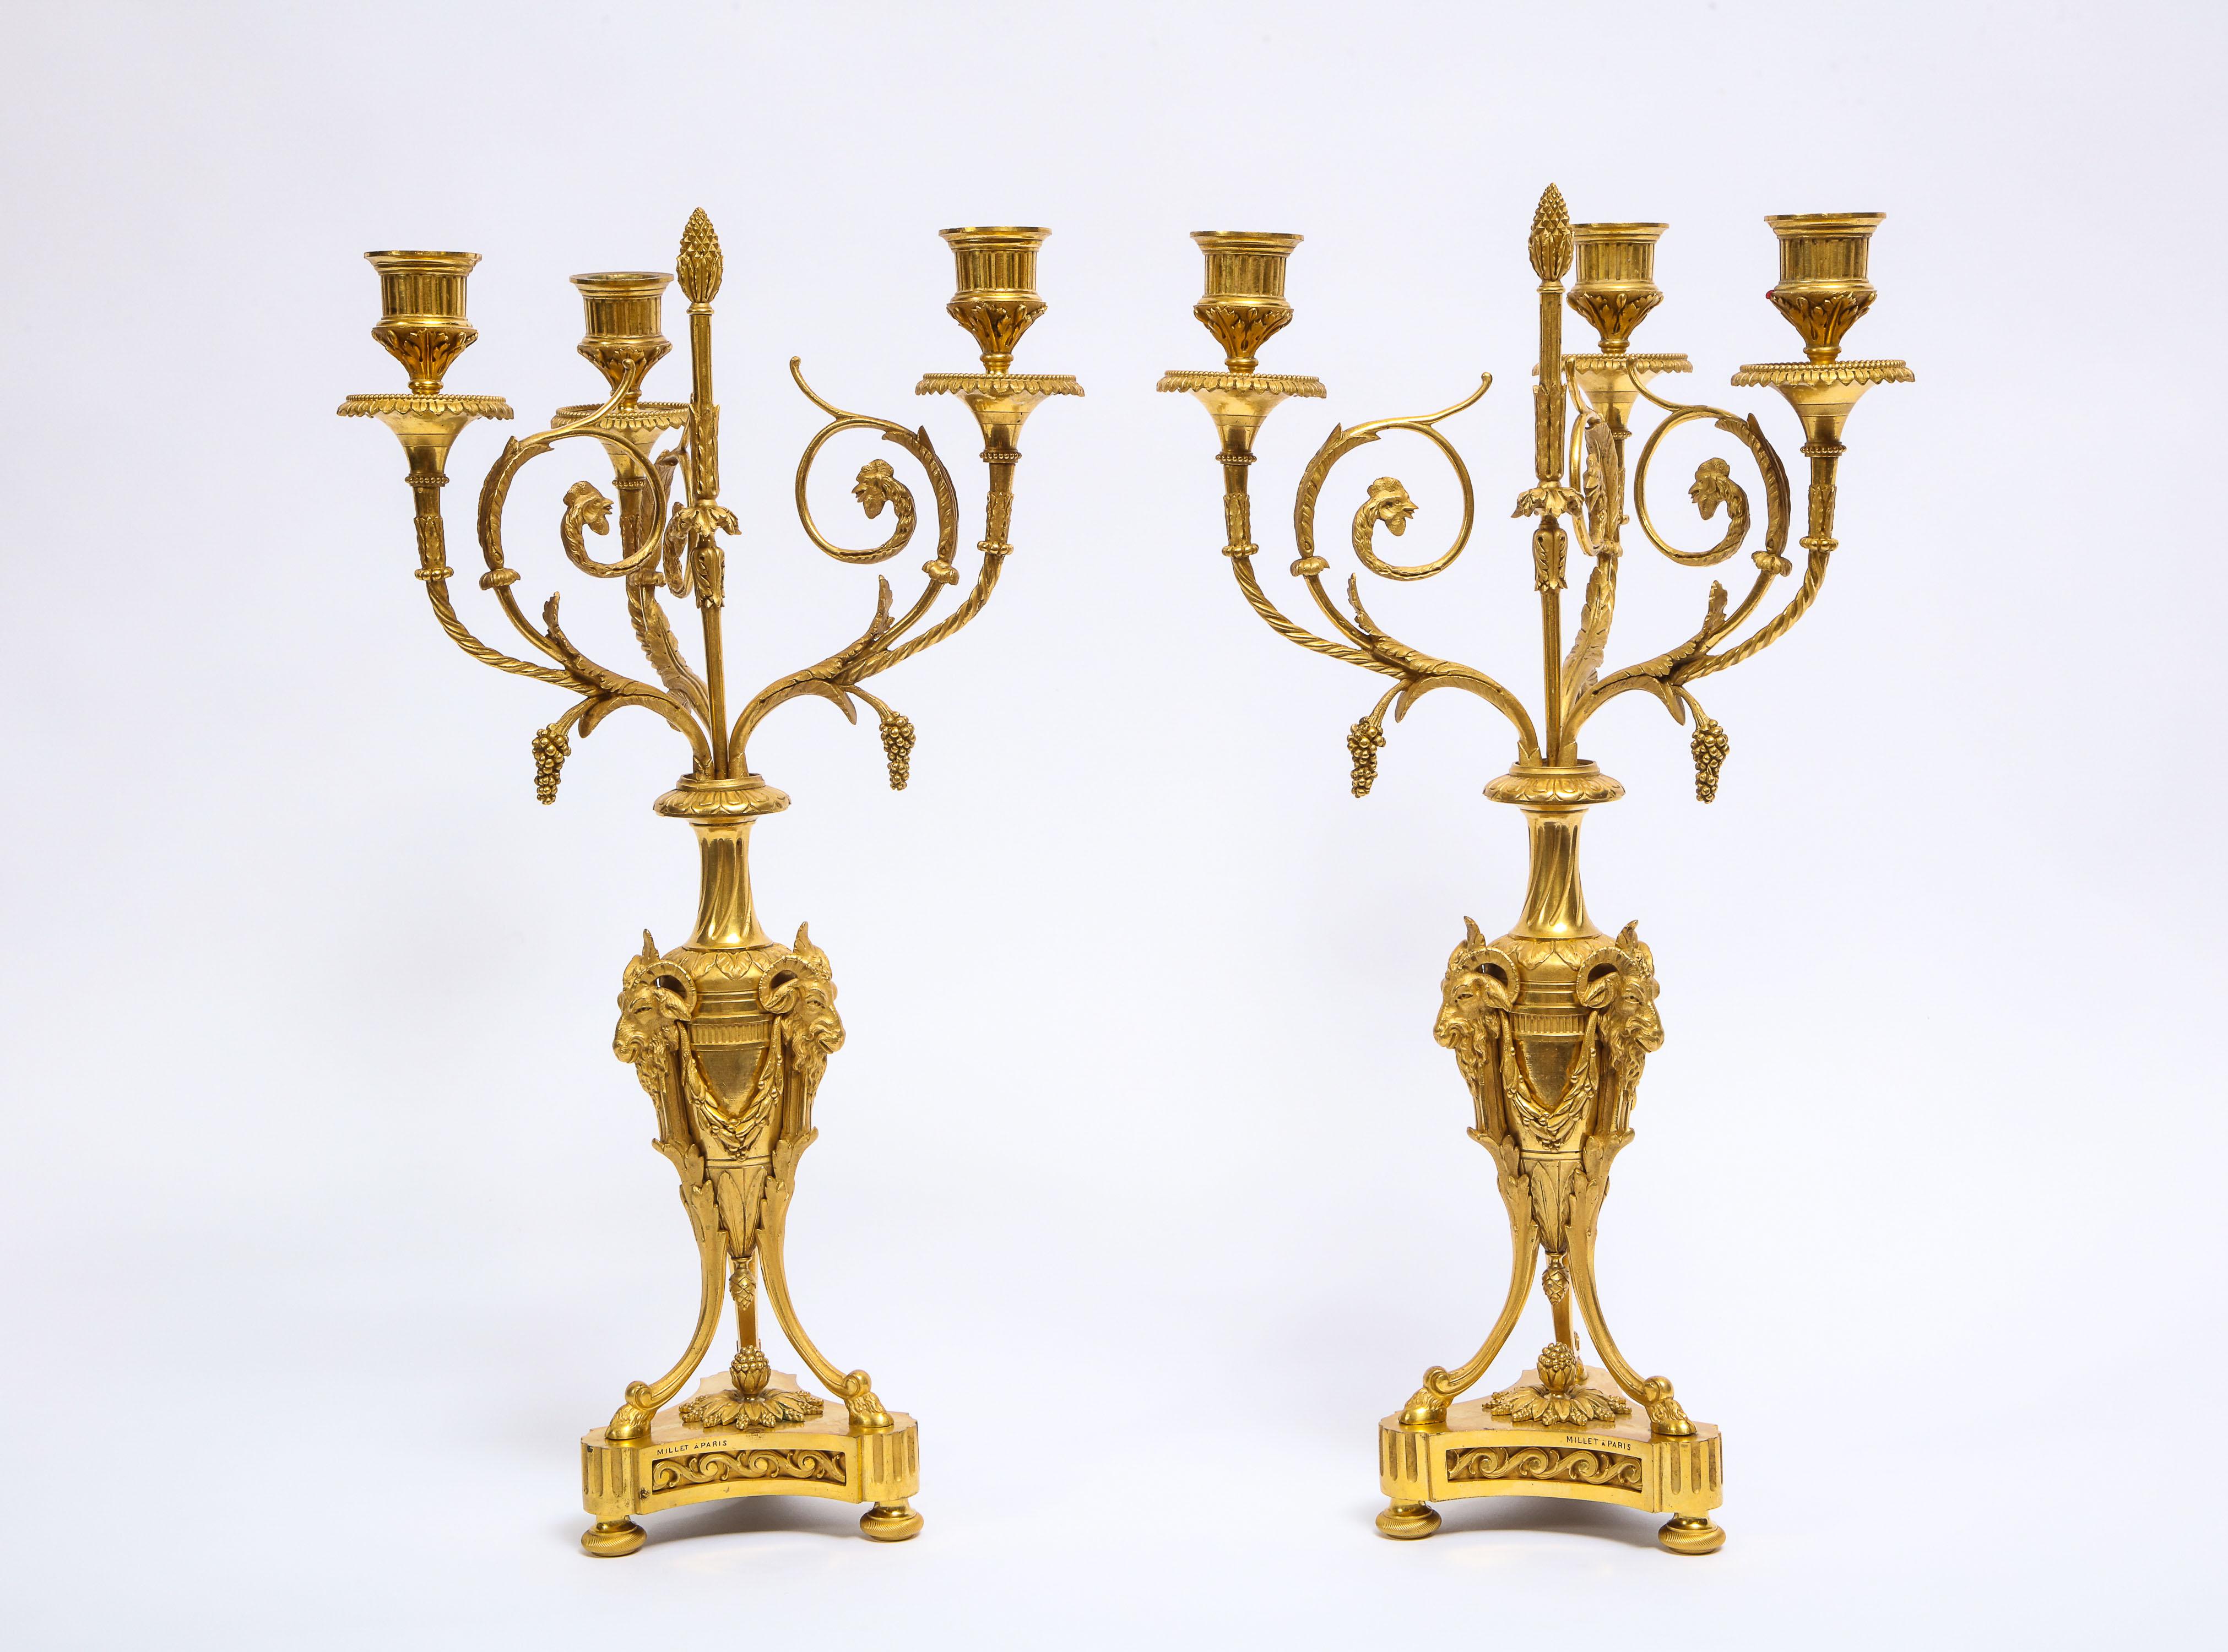 A fabulous pair of antique French Louis XVI style, doré bronze three-arm candelabras. Each candelabra finely casted, and further enhanced with the finest quality of doré bronze and hand-chasing, leading to an elaborate amount of detail to each